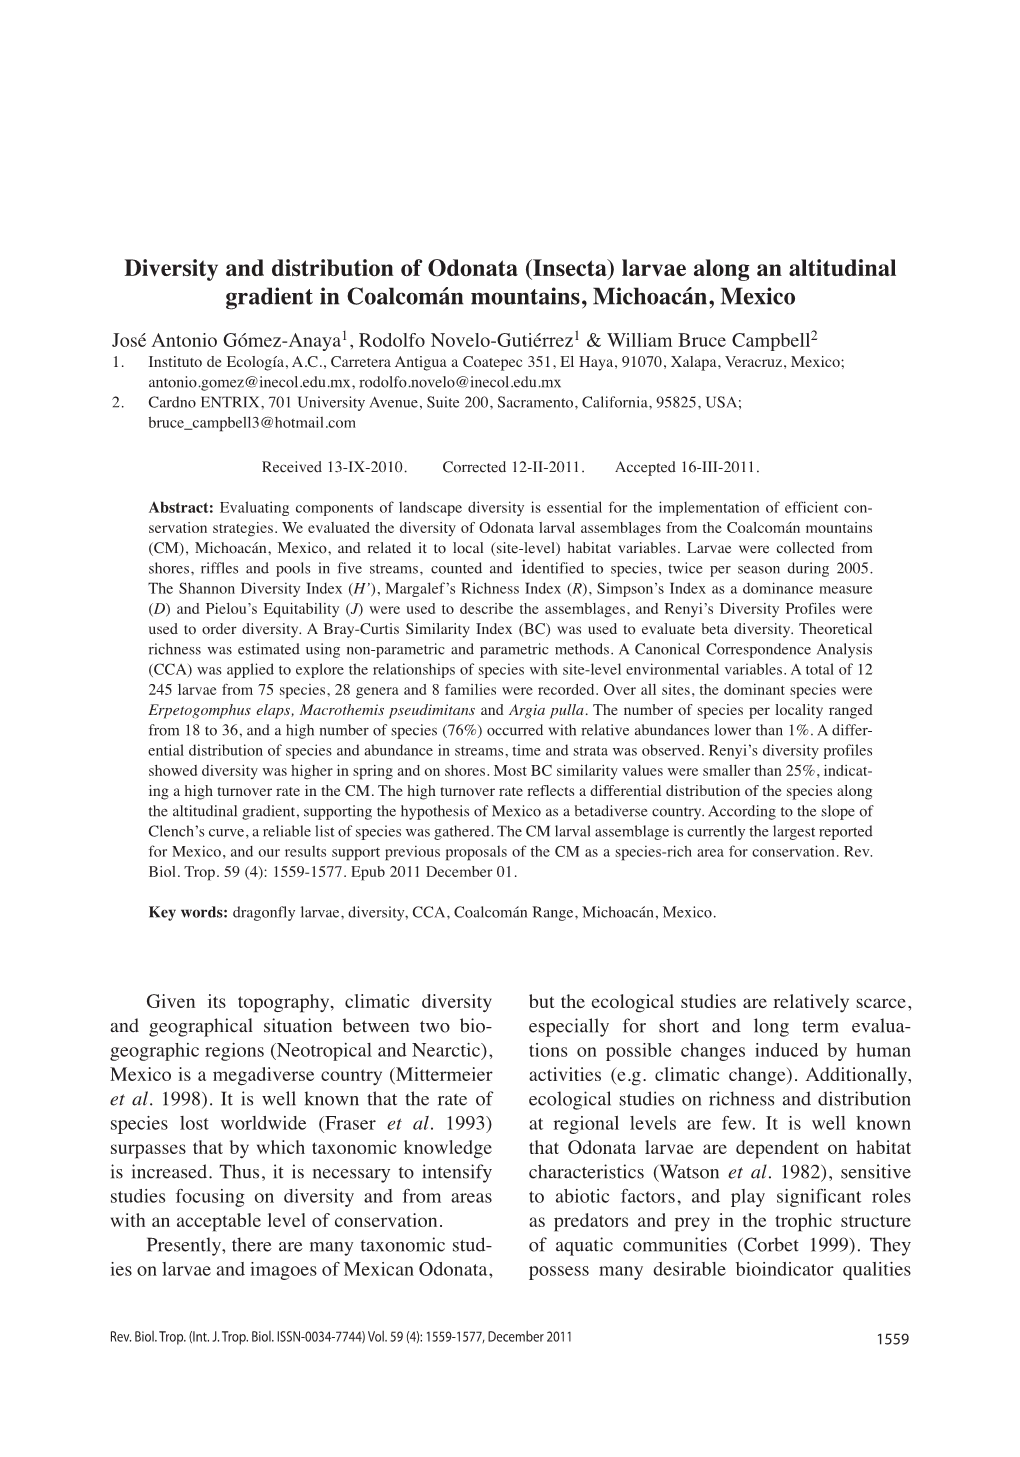 Diversity and Distribution of Odonata (Insecta) Larvae Along an Altitudinal Gradient in Coalcomán Mountains, Michoacán, Mexico